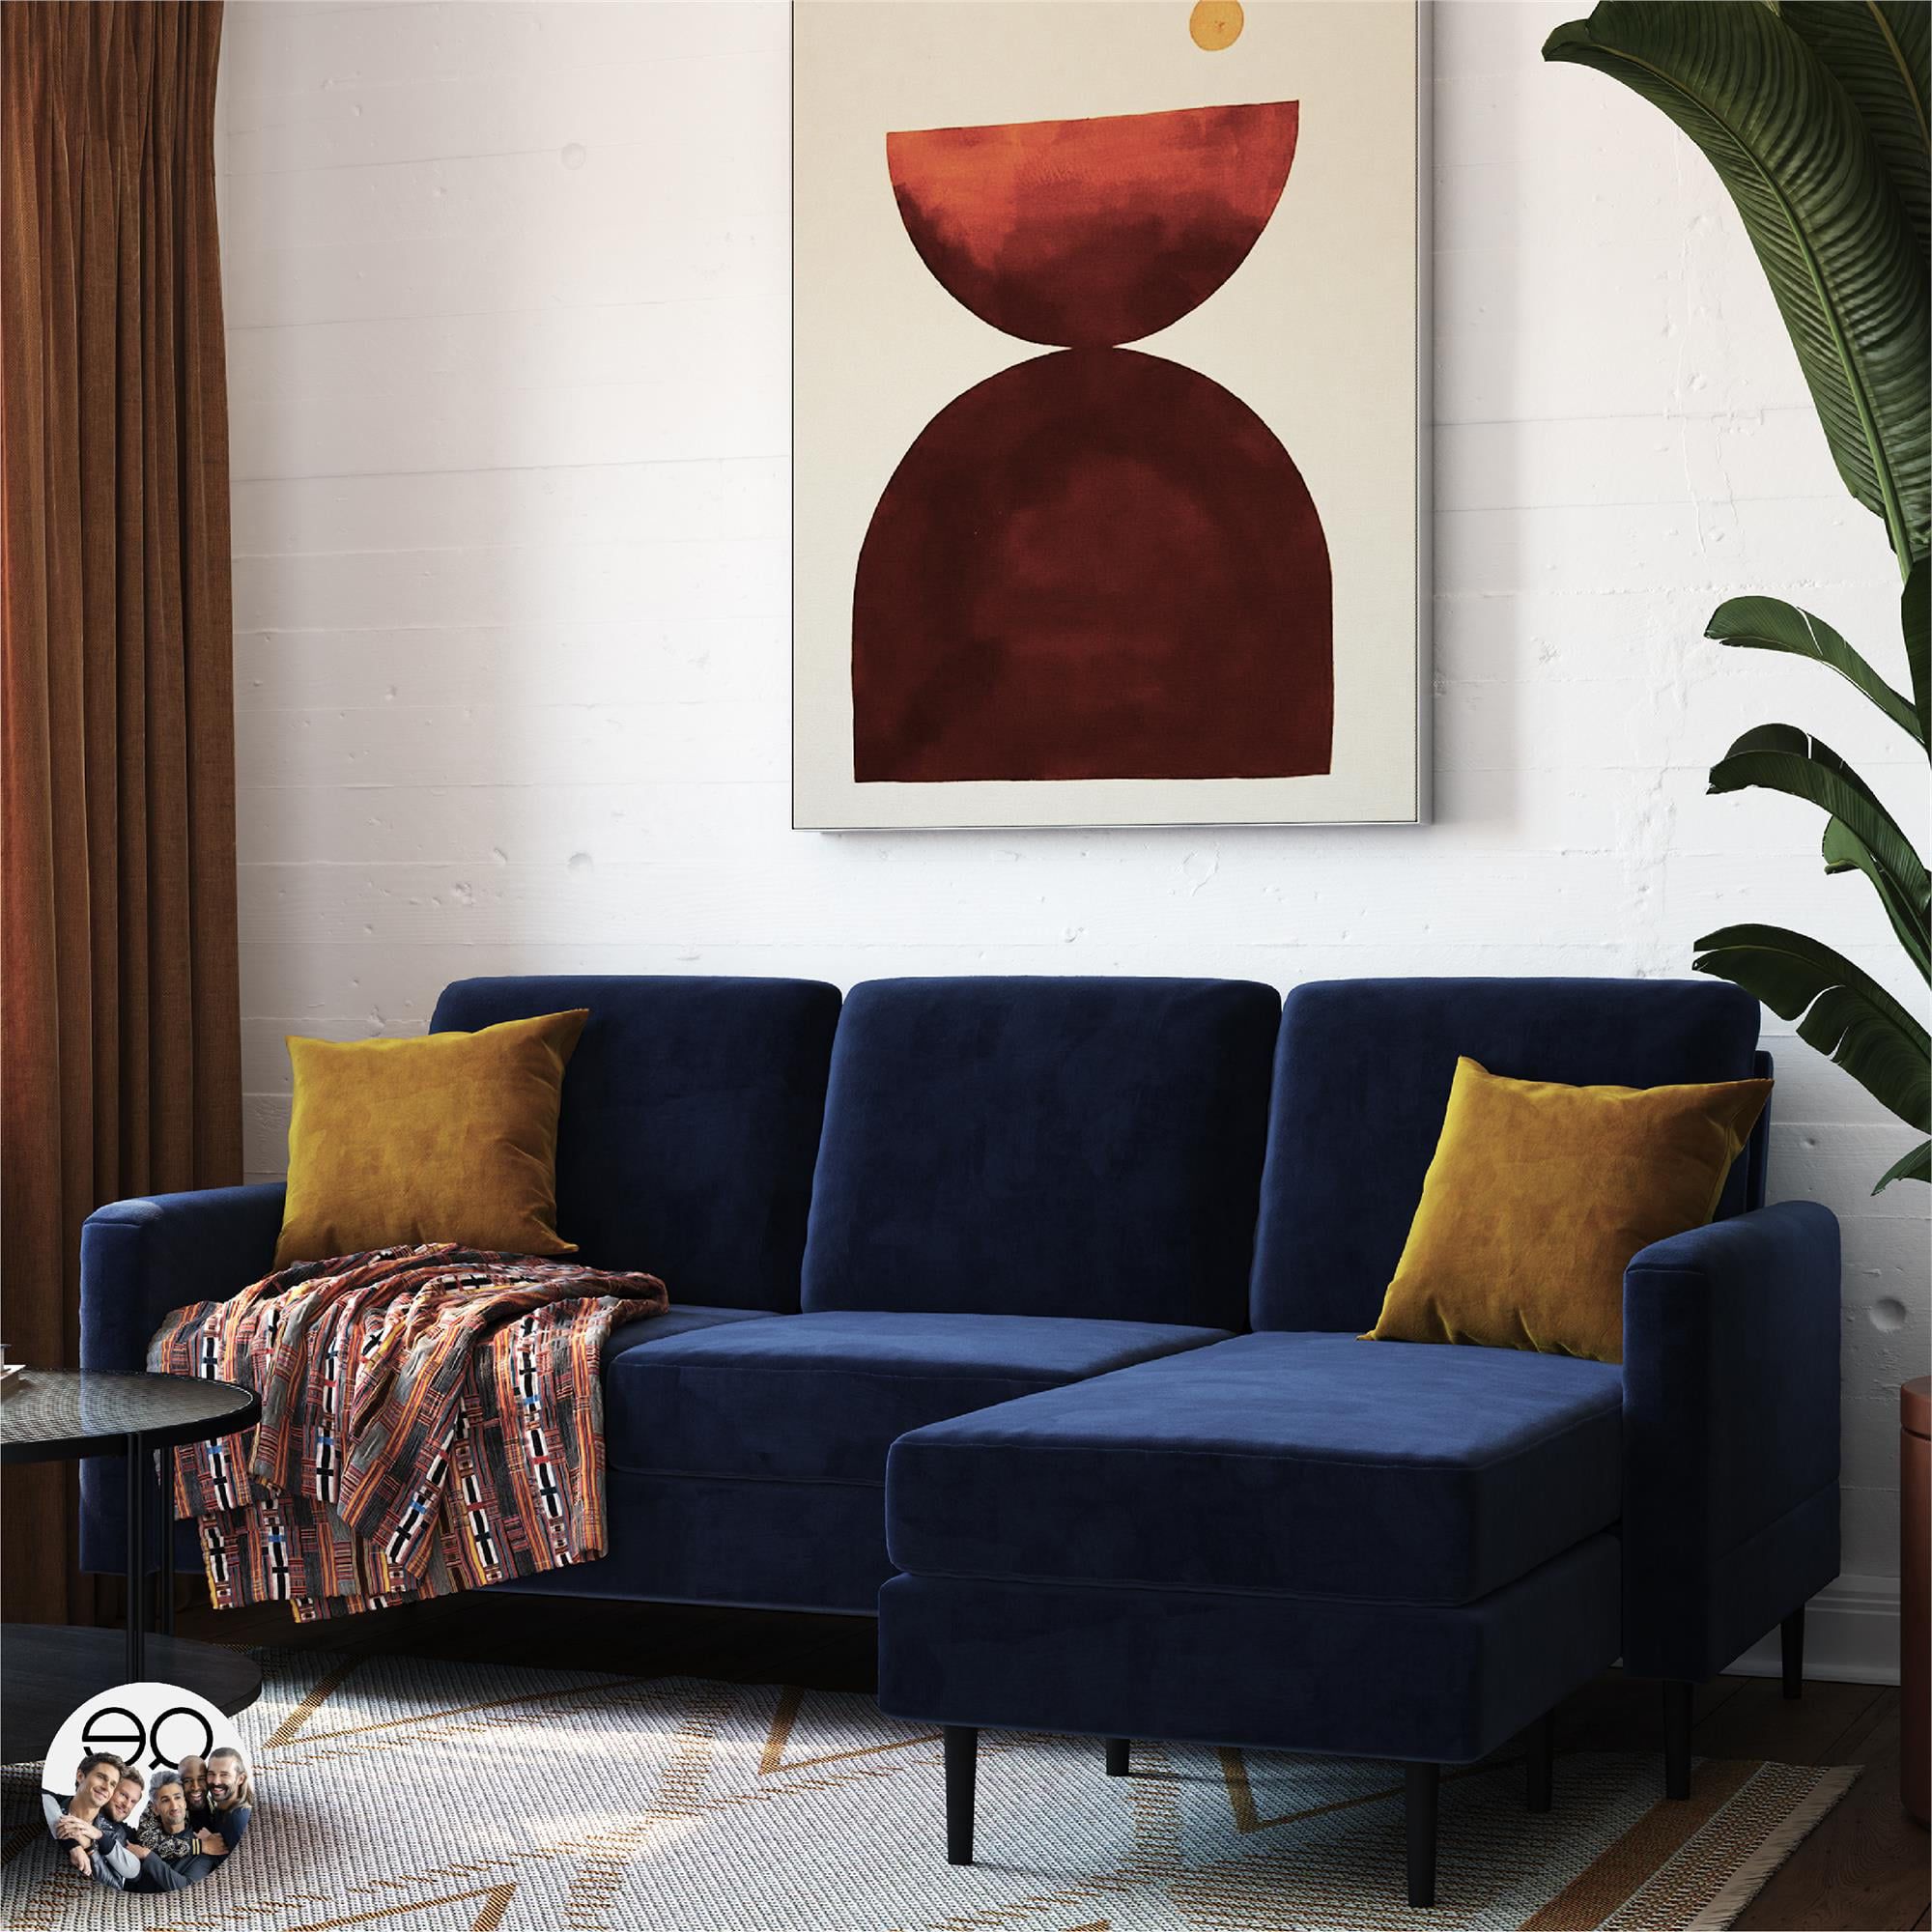 Queer Eye Wimberly Pillowback Sofa Sectional, Blue Velvet – Walmart For Pillowback Sofa Sectionals (Gallery 3 of 20)